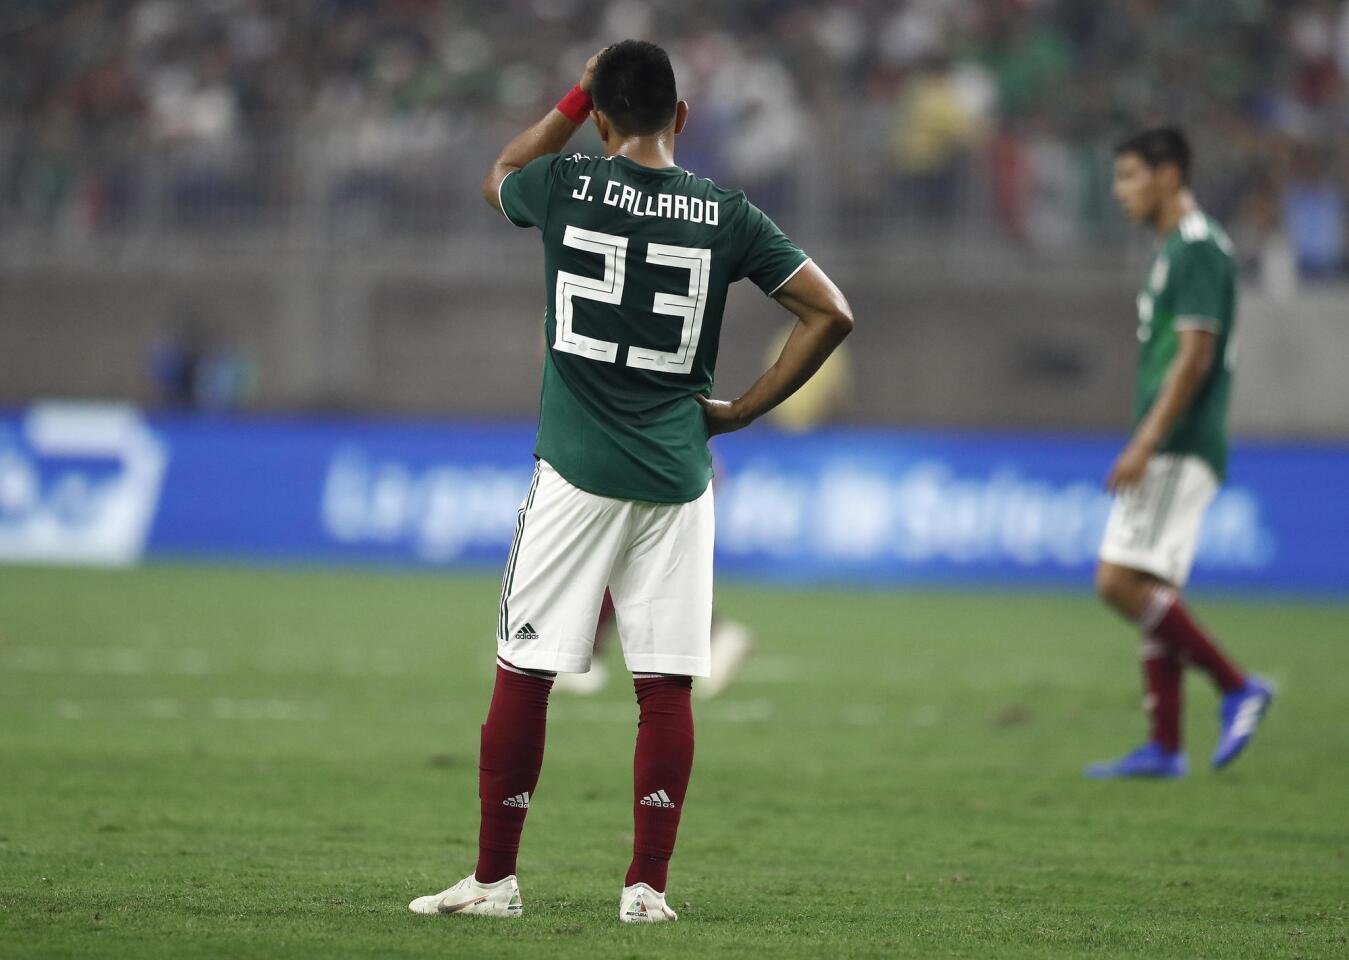 LWS113. Houston (United States), 07/09/2018.- Mexico player Jesus Gallardo stands in the middle of the field after a goal by Uruguay in the first half of the friendly soccer match between Mexico and Uruguay at NRG Stadium in Houston,Texas, USA, 07 September 2018. (Futbol, Amistoso, Estados Unidos) EFE/EPA/LARRY W. SMITH ** Usable by HOY and SD Only **